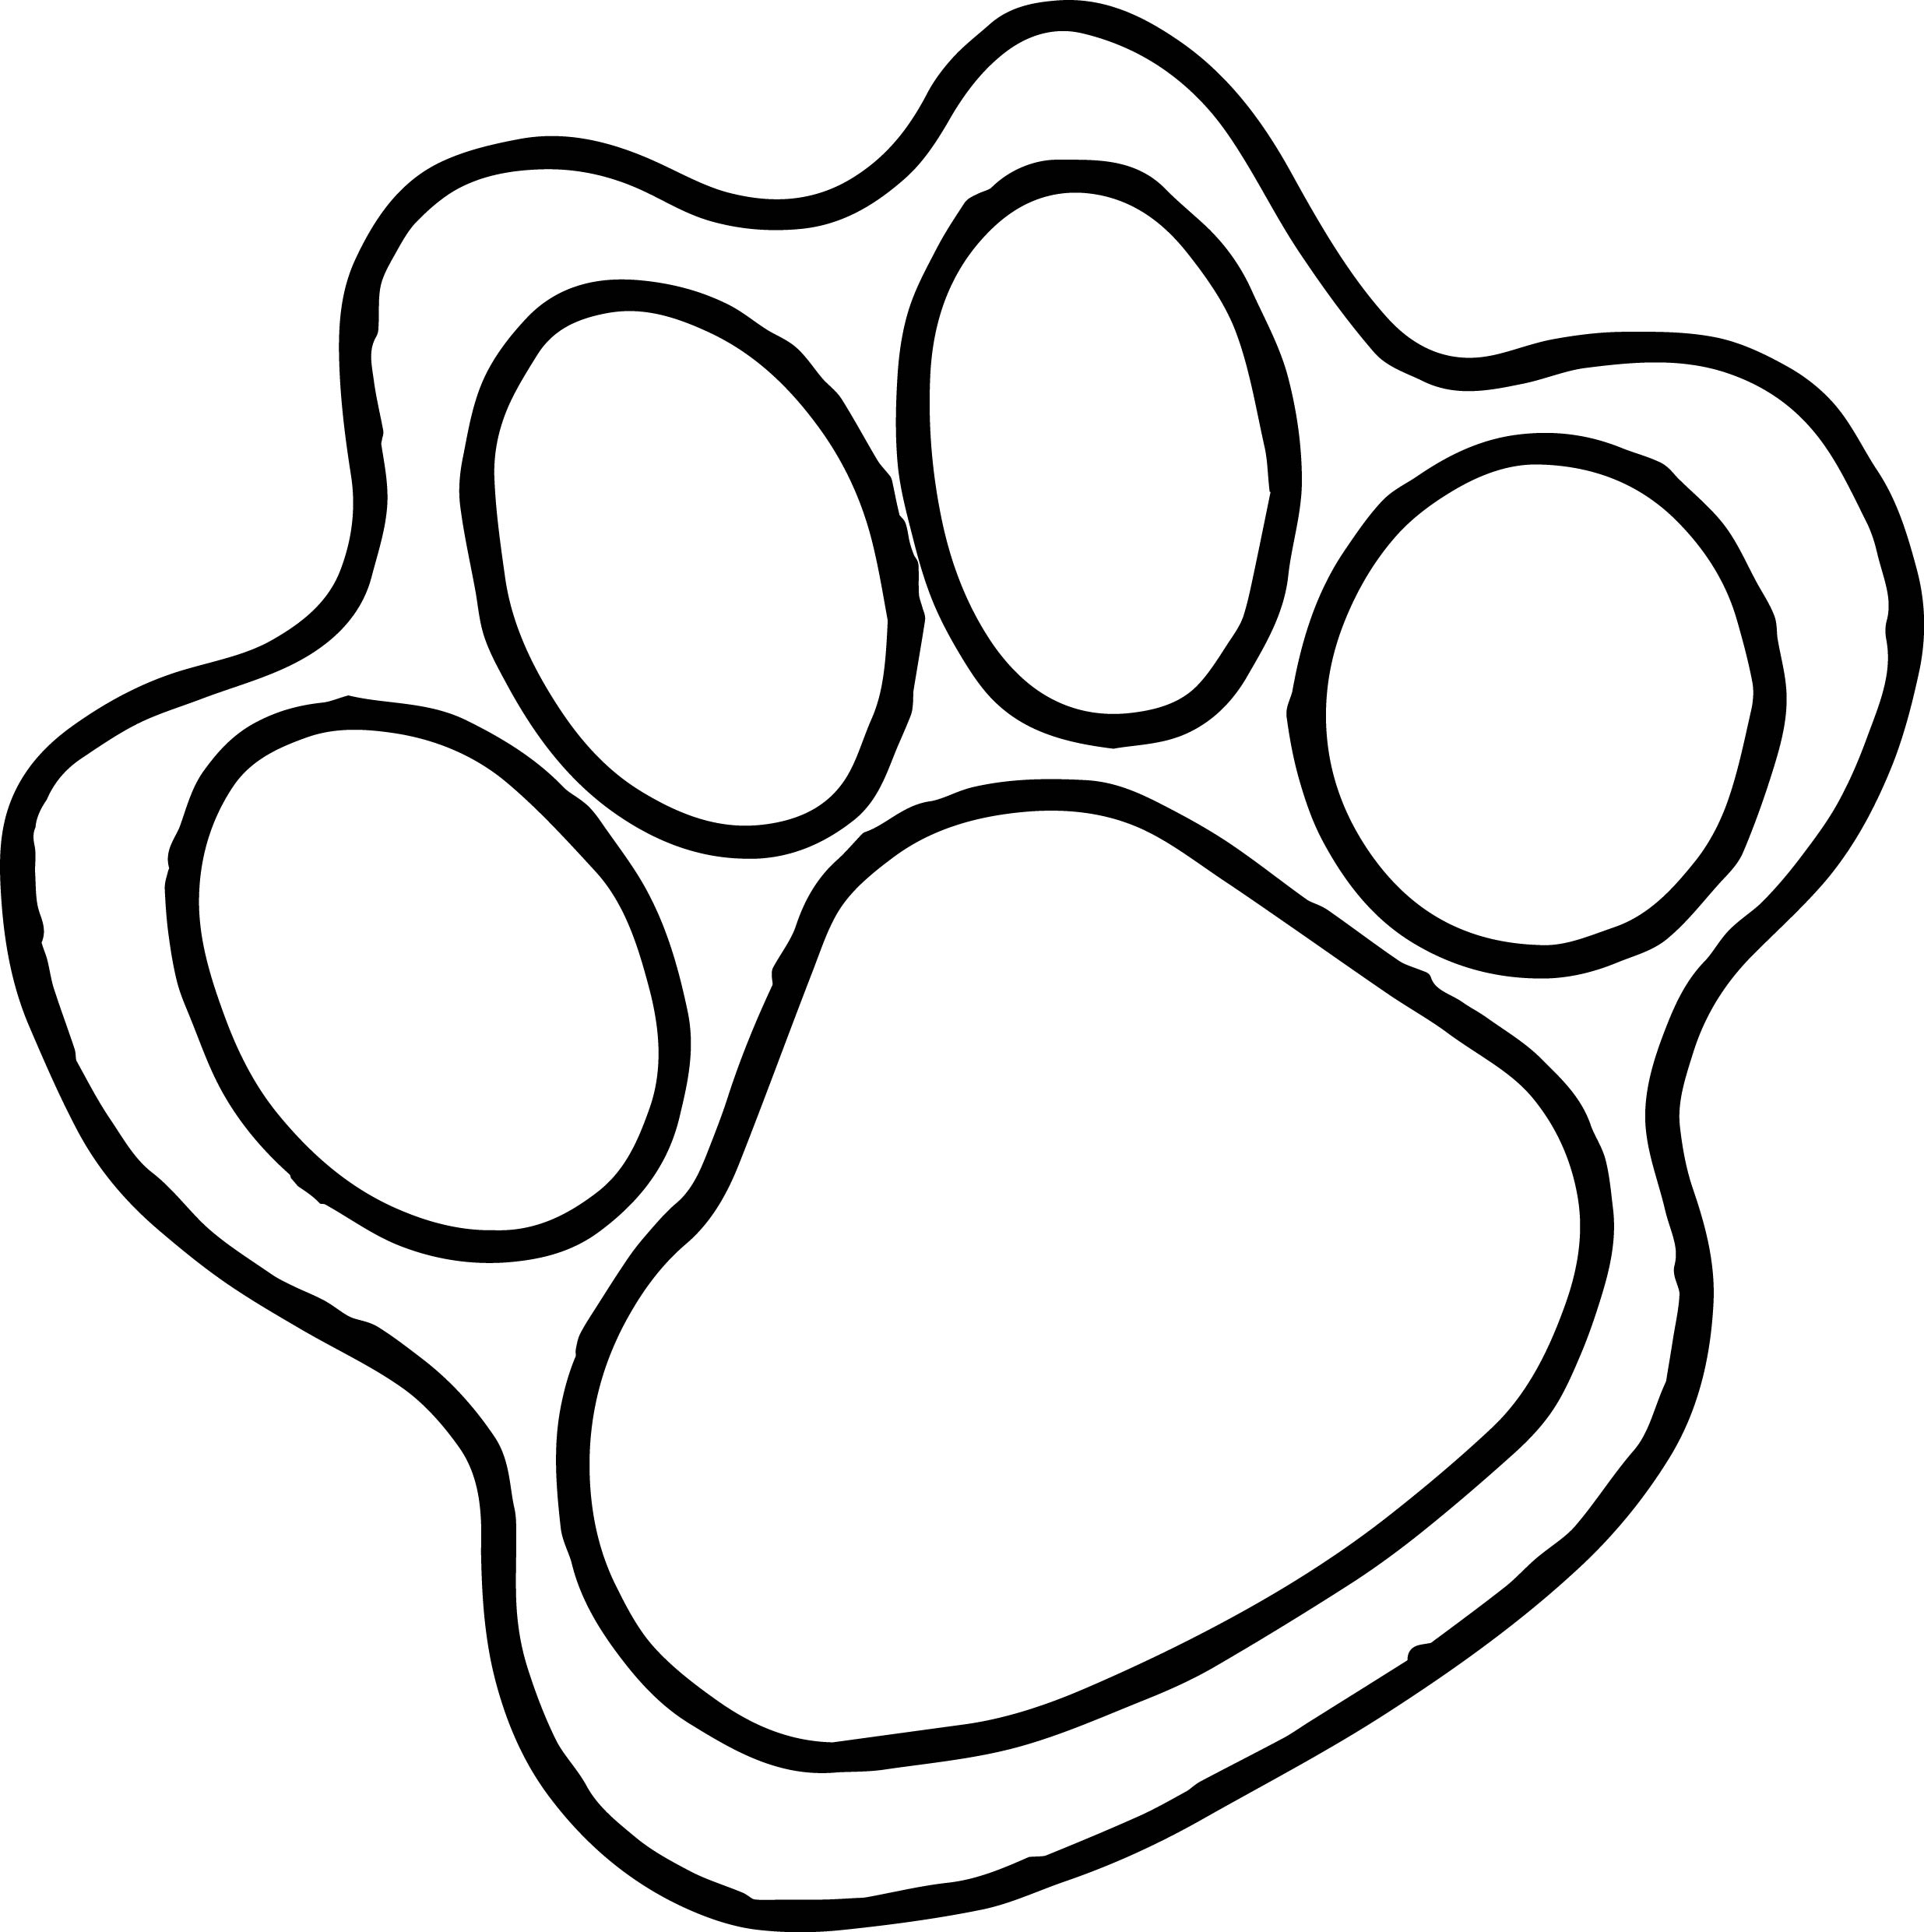 How To Draw A Tiger Paw Print | Free download on ClipArtMag